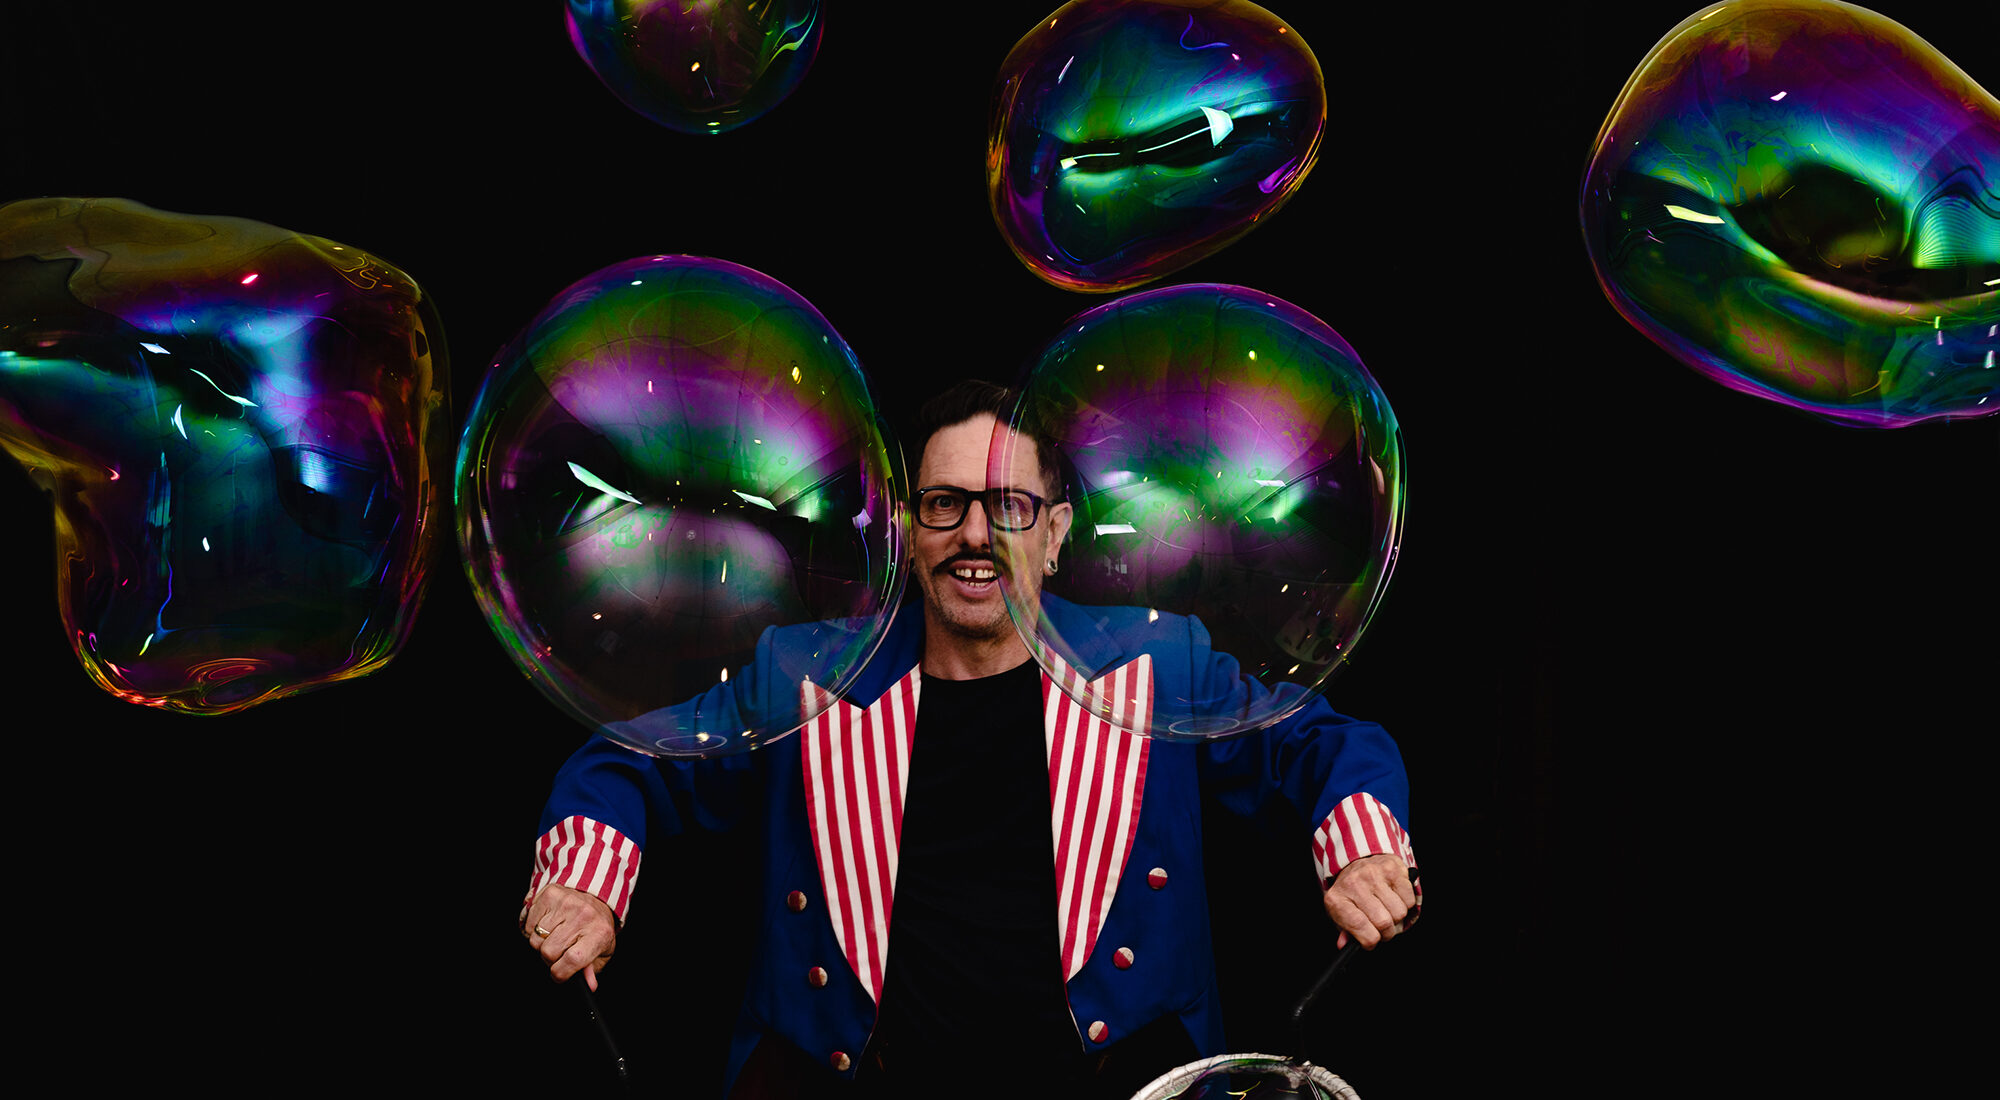 A person stood behind bubbles.